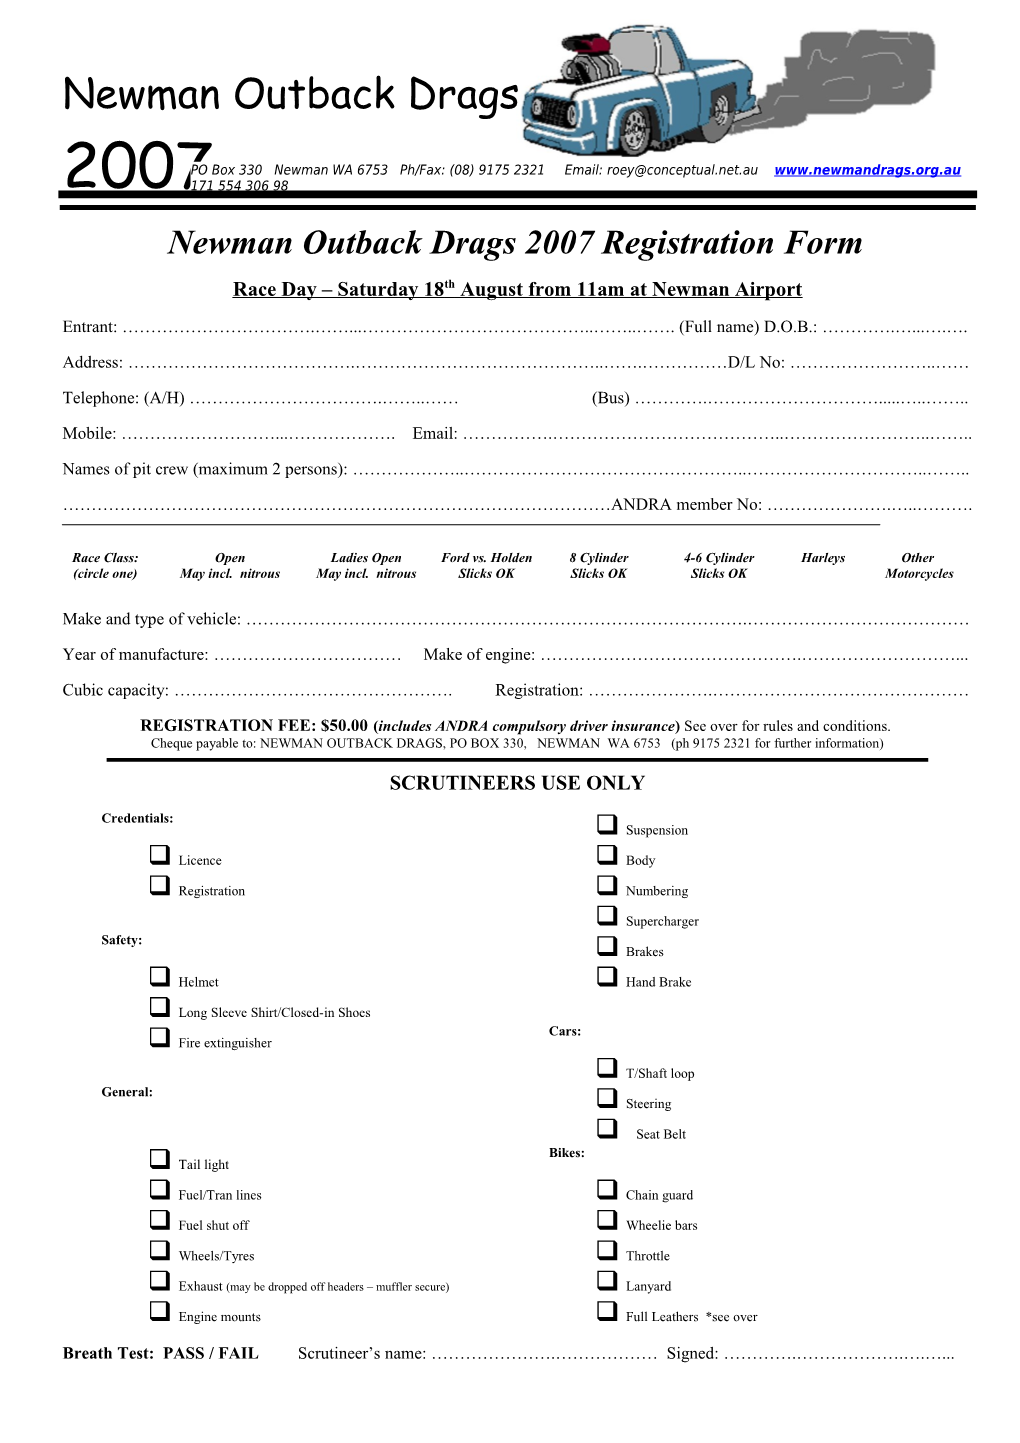 Newman Outback Drags 2007 Registration Form